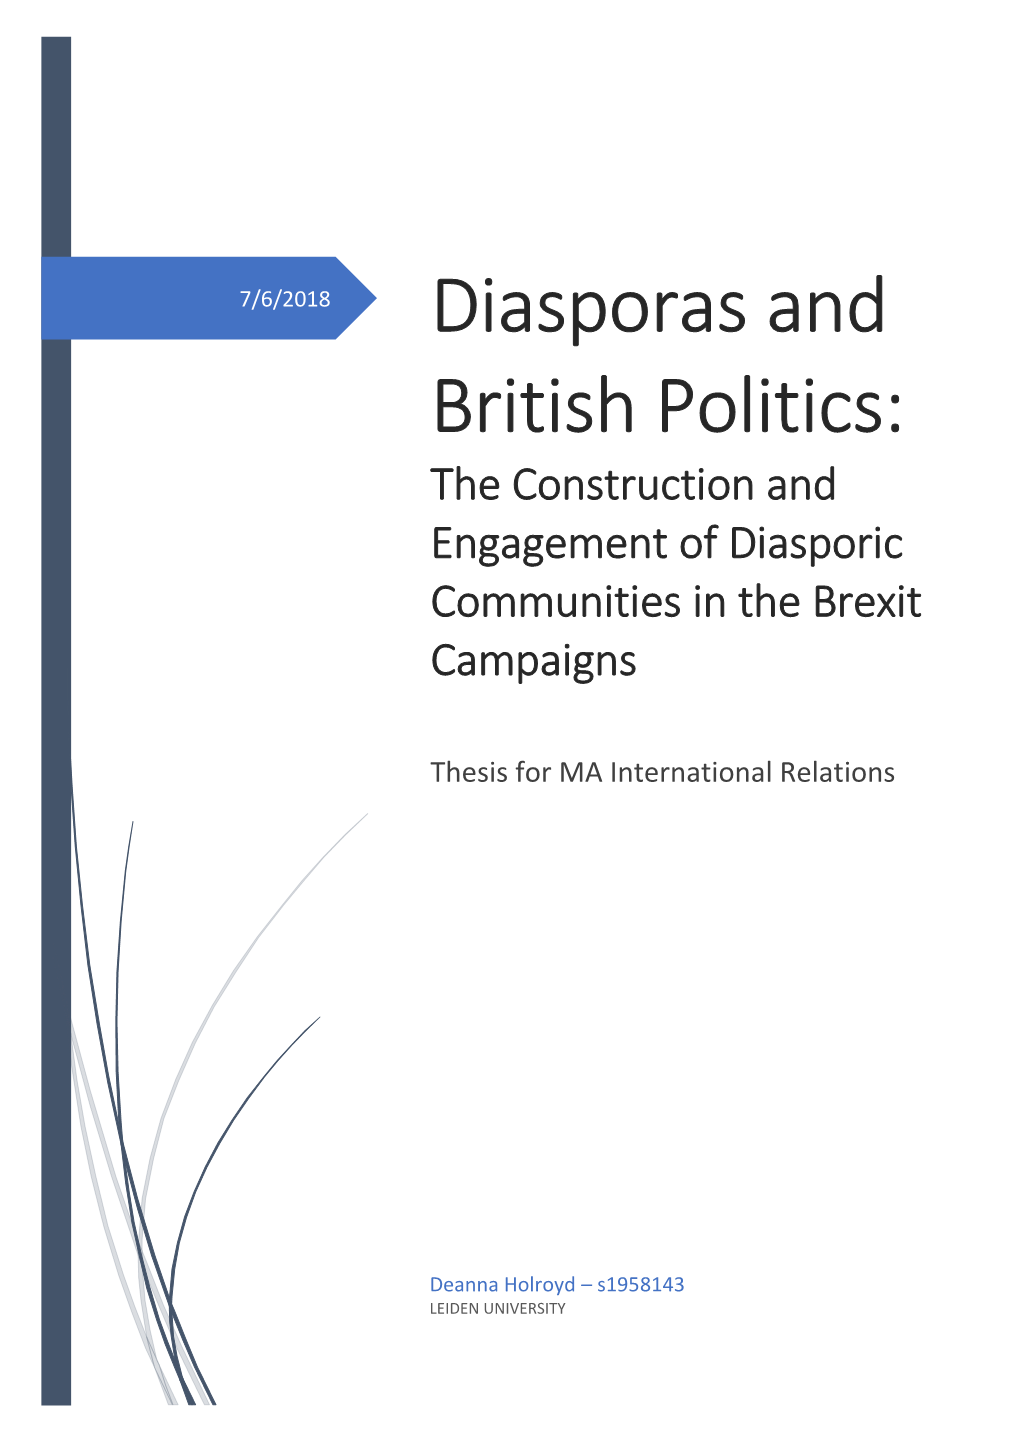 Diasporas and British Politics: the Construction and Engagement of Diasporic Communities in the Brexit Campaigns